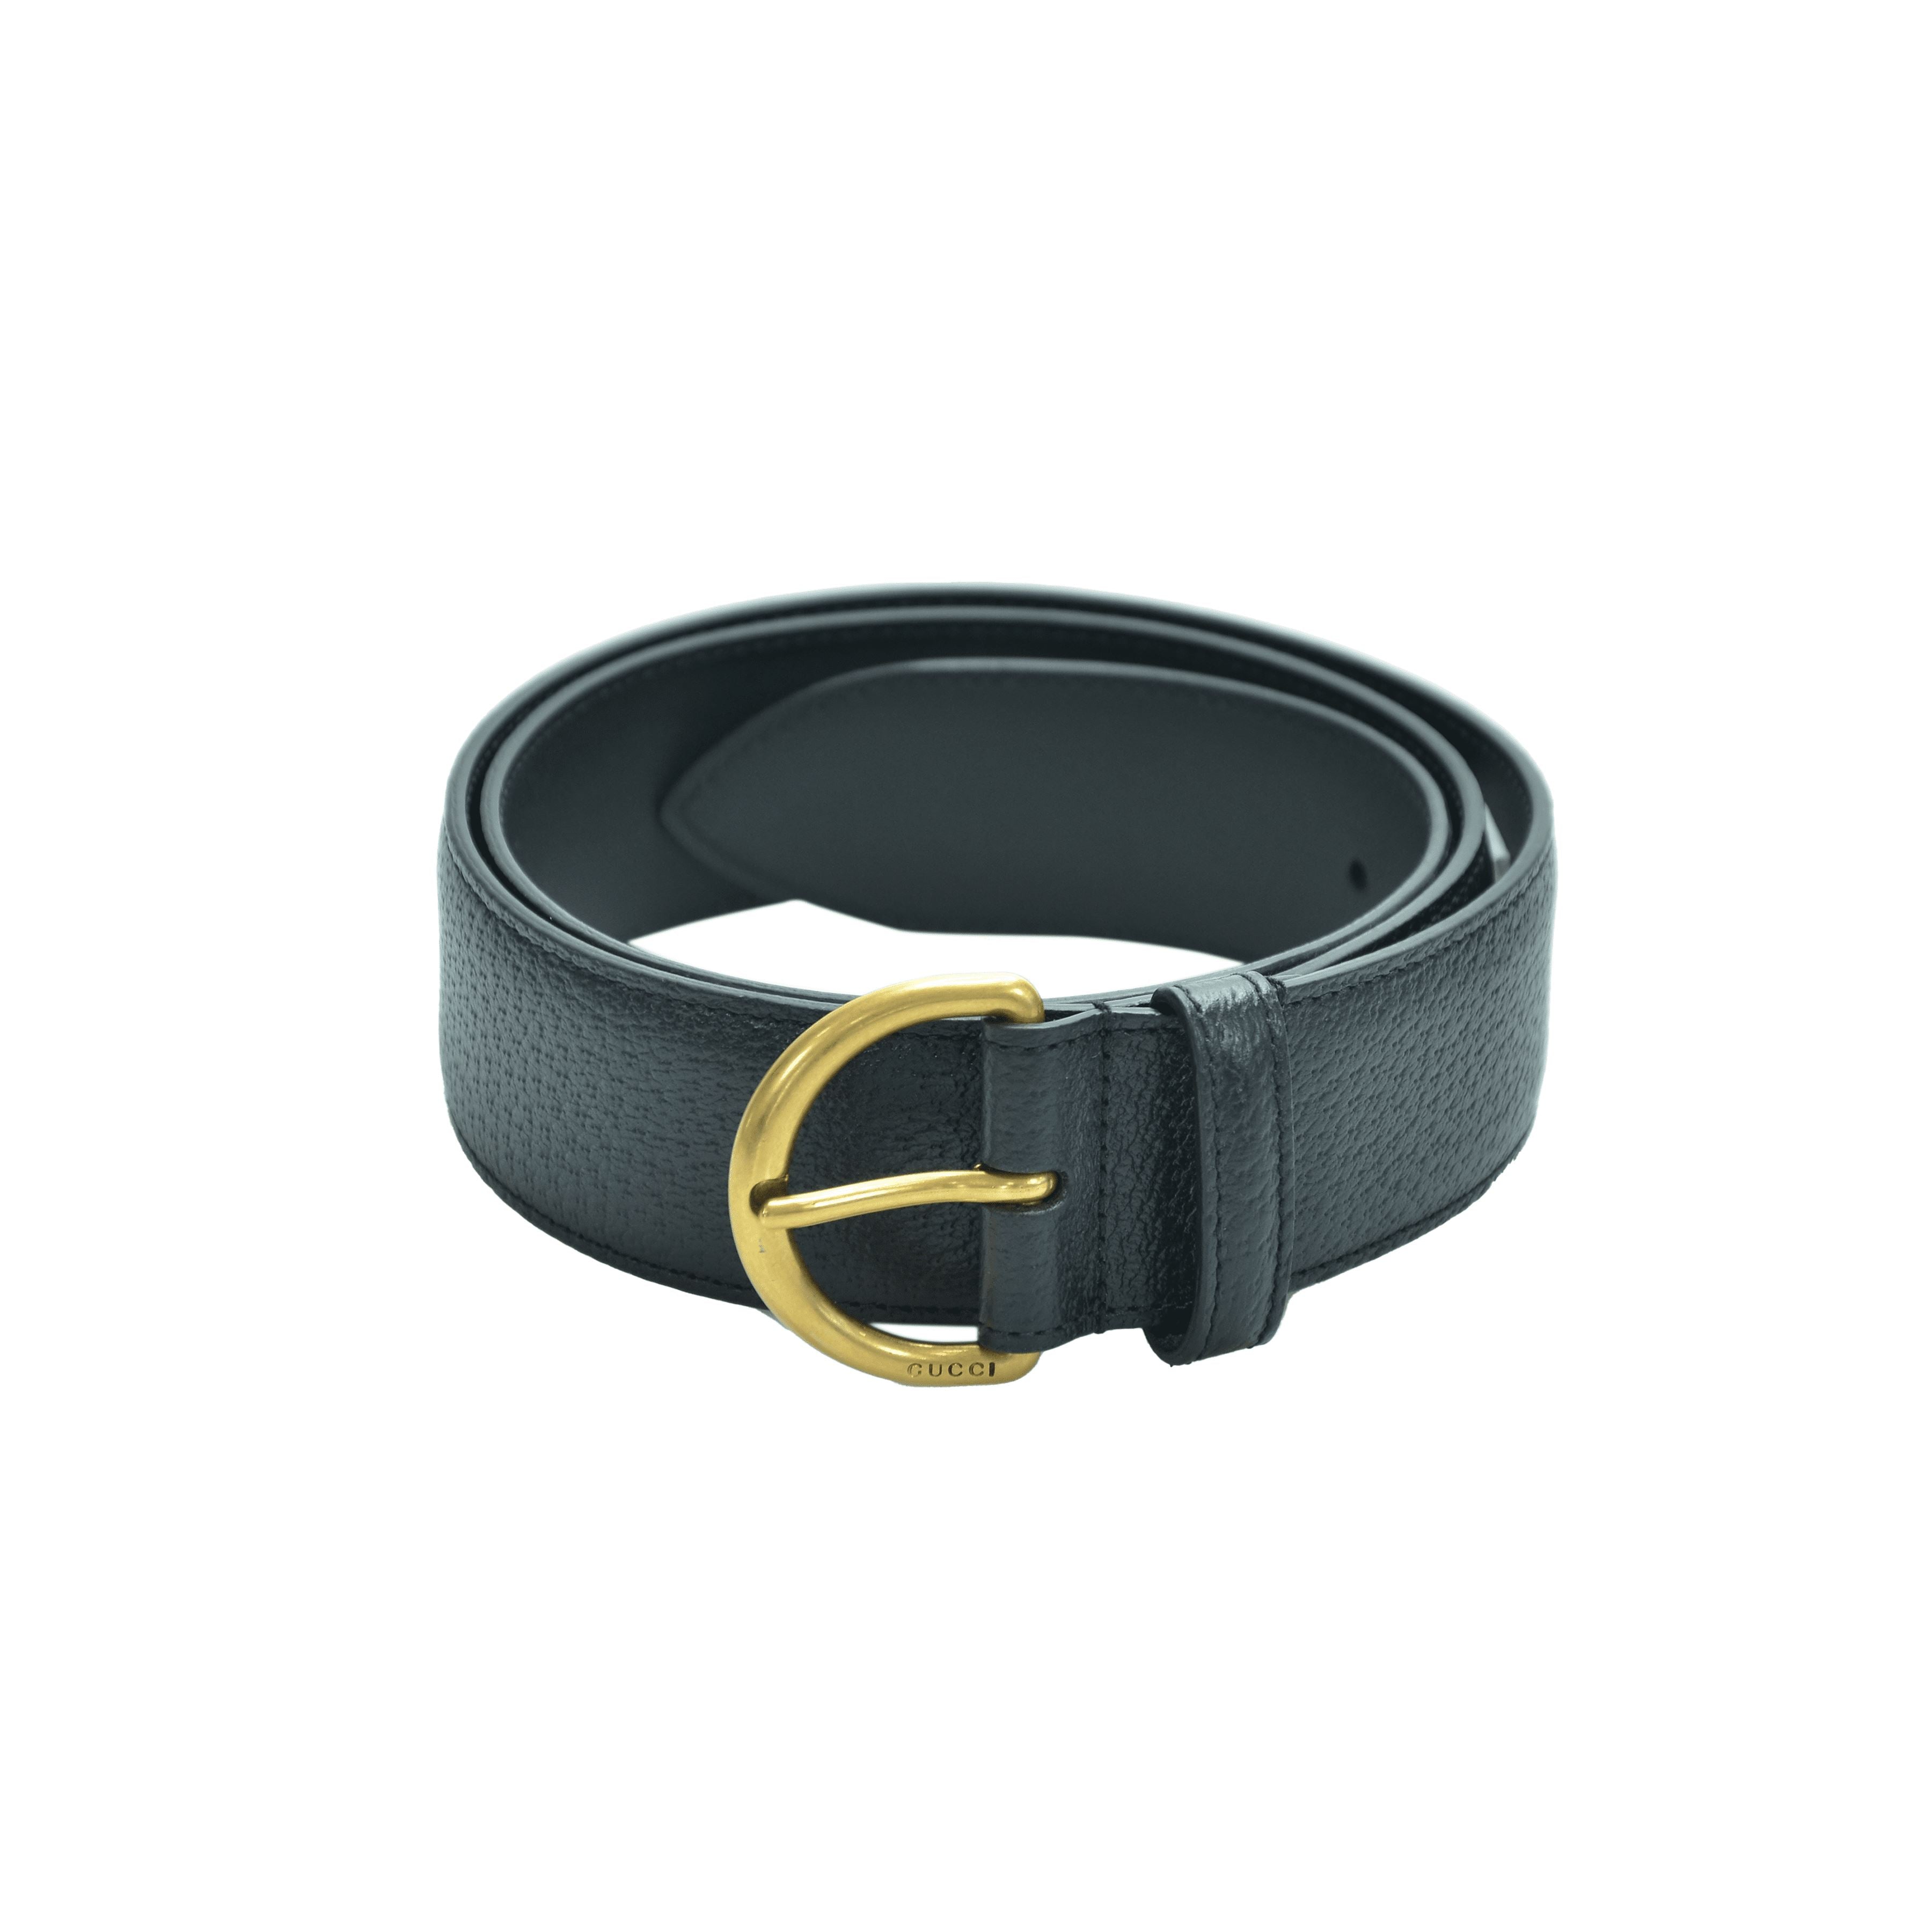 Burberry Black Leather Belt With Gold Buckle Accessories Burberry 